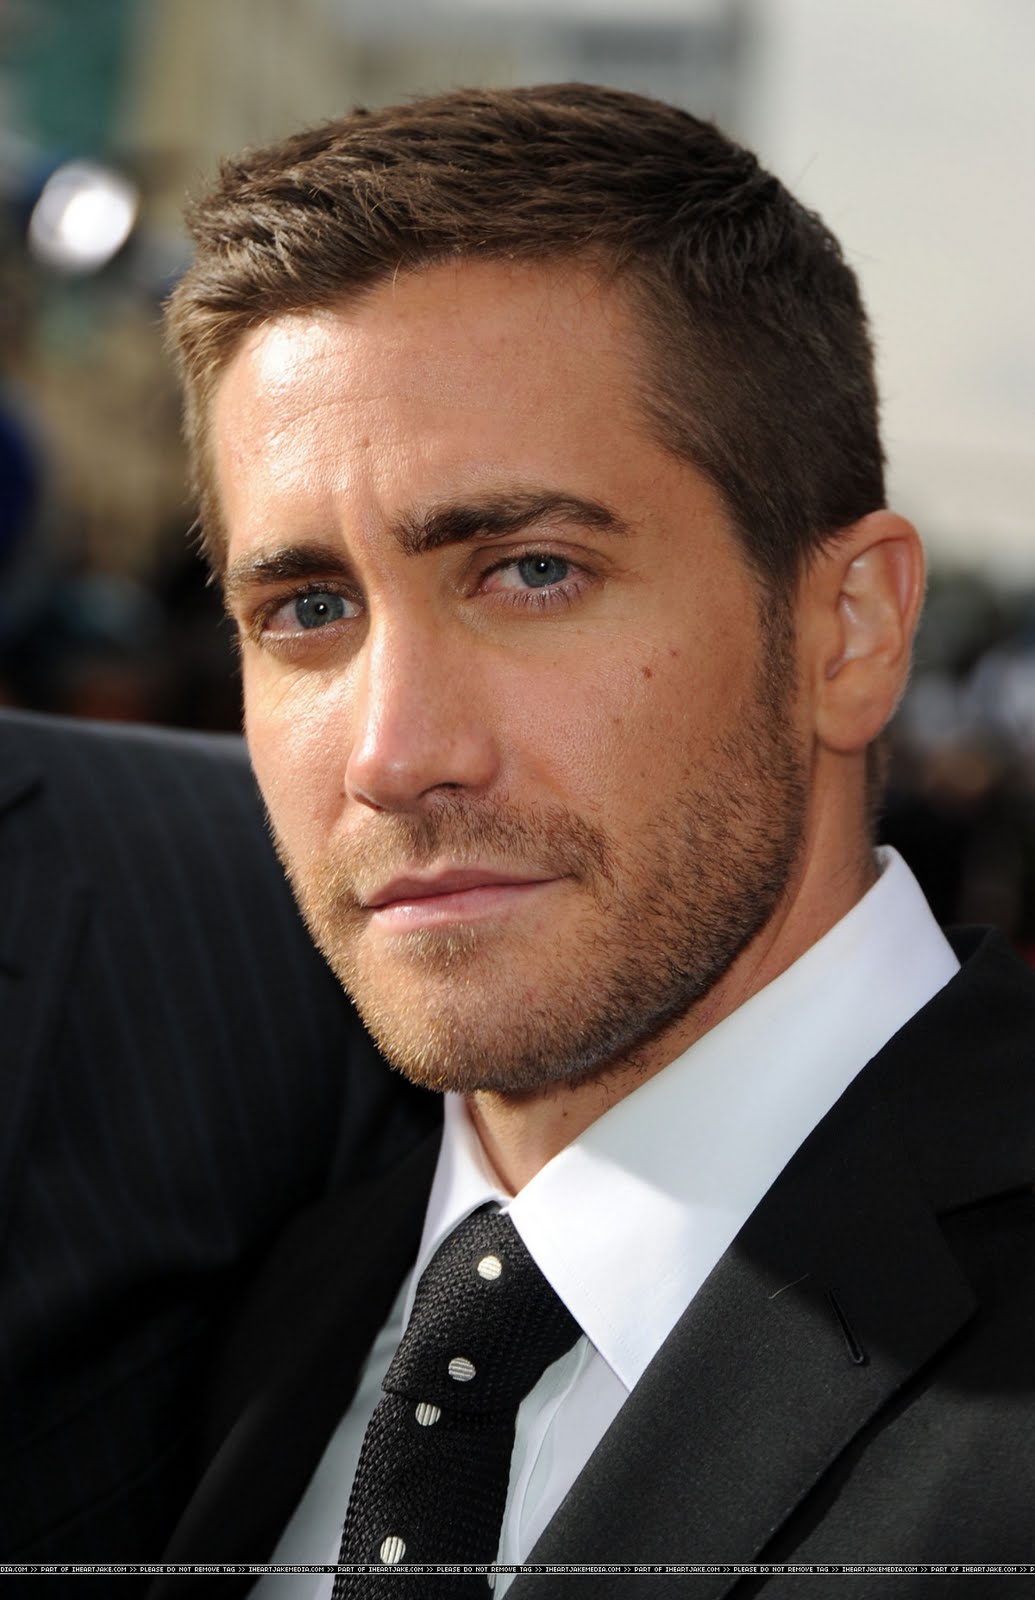 Jake Gyllenhaal attending "Prince of Persia: The Sands of Time" L...